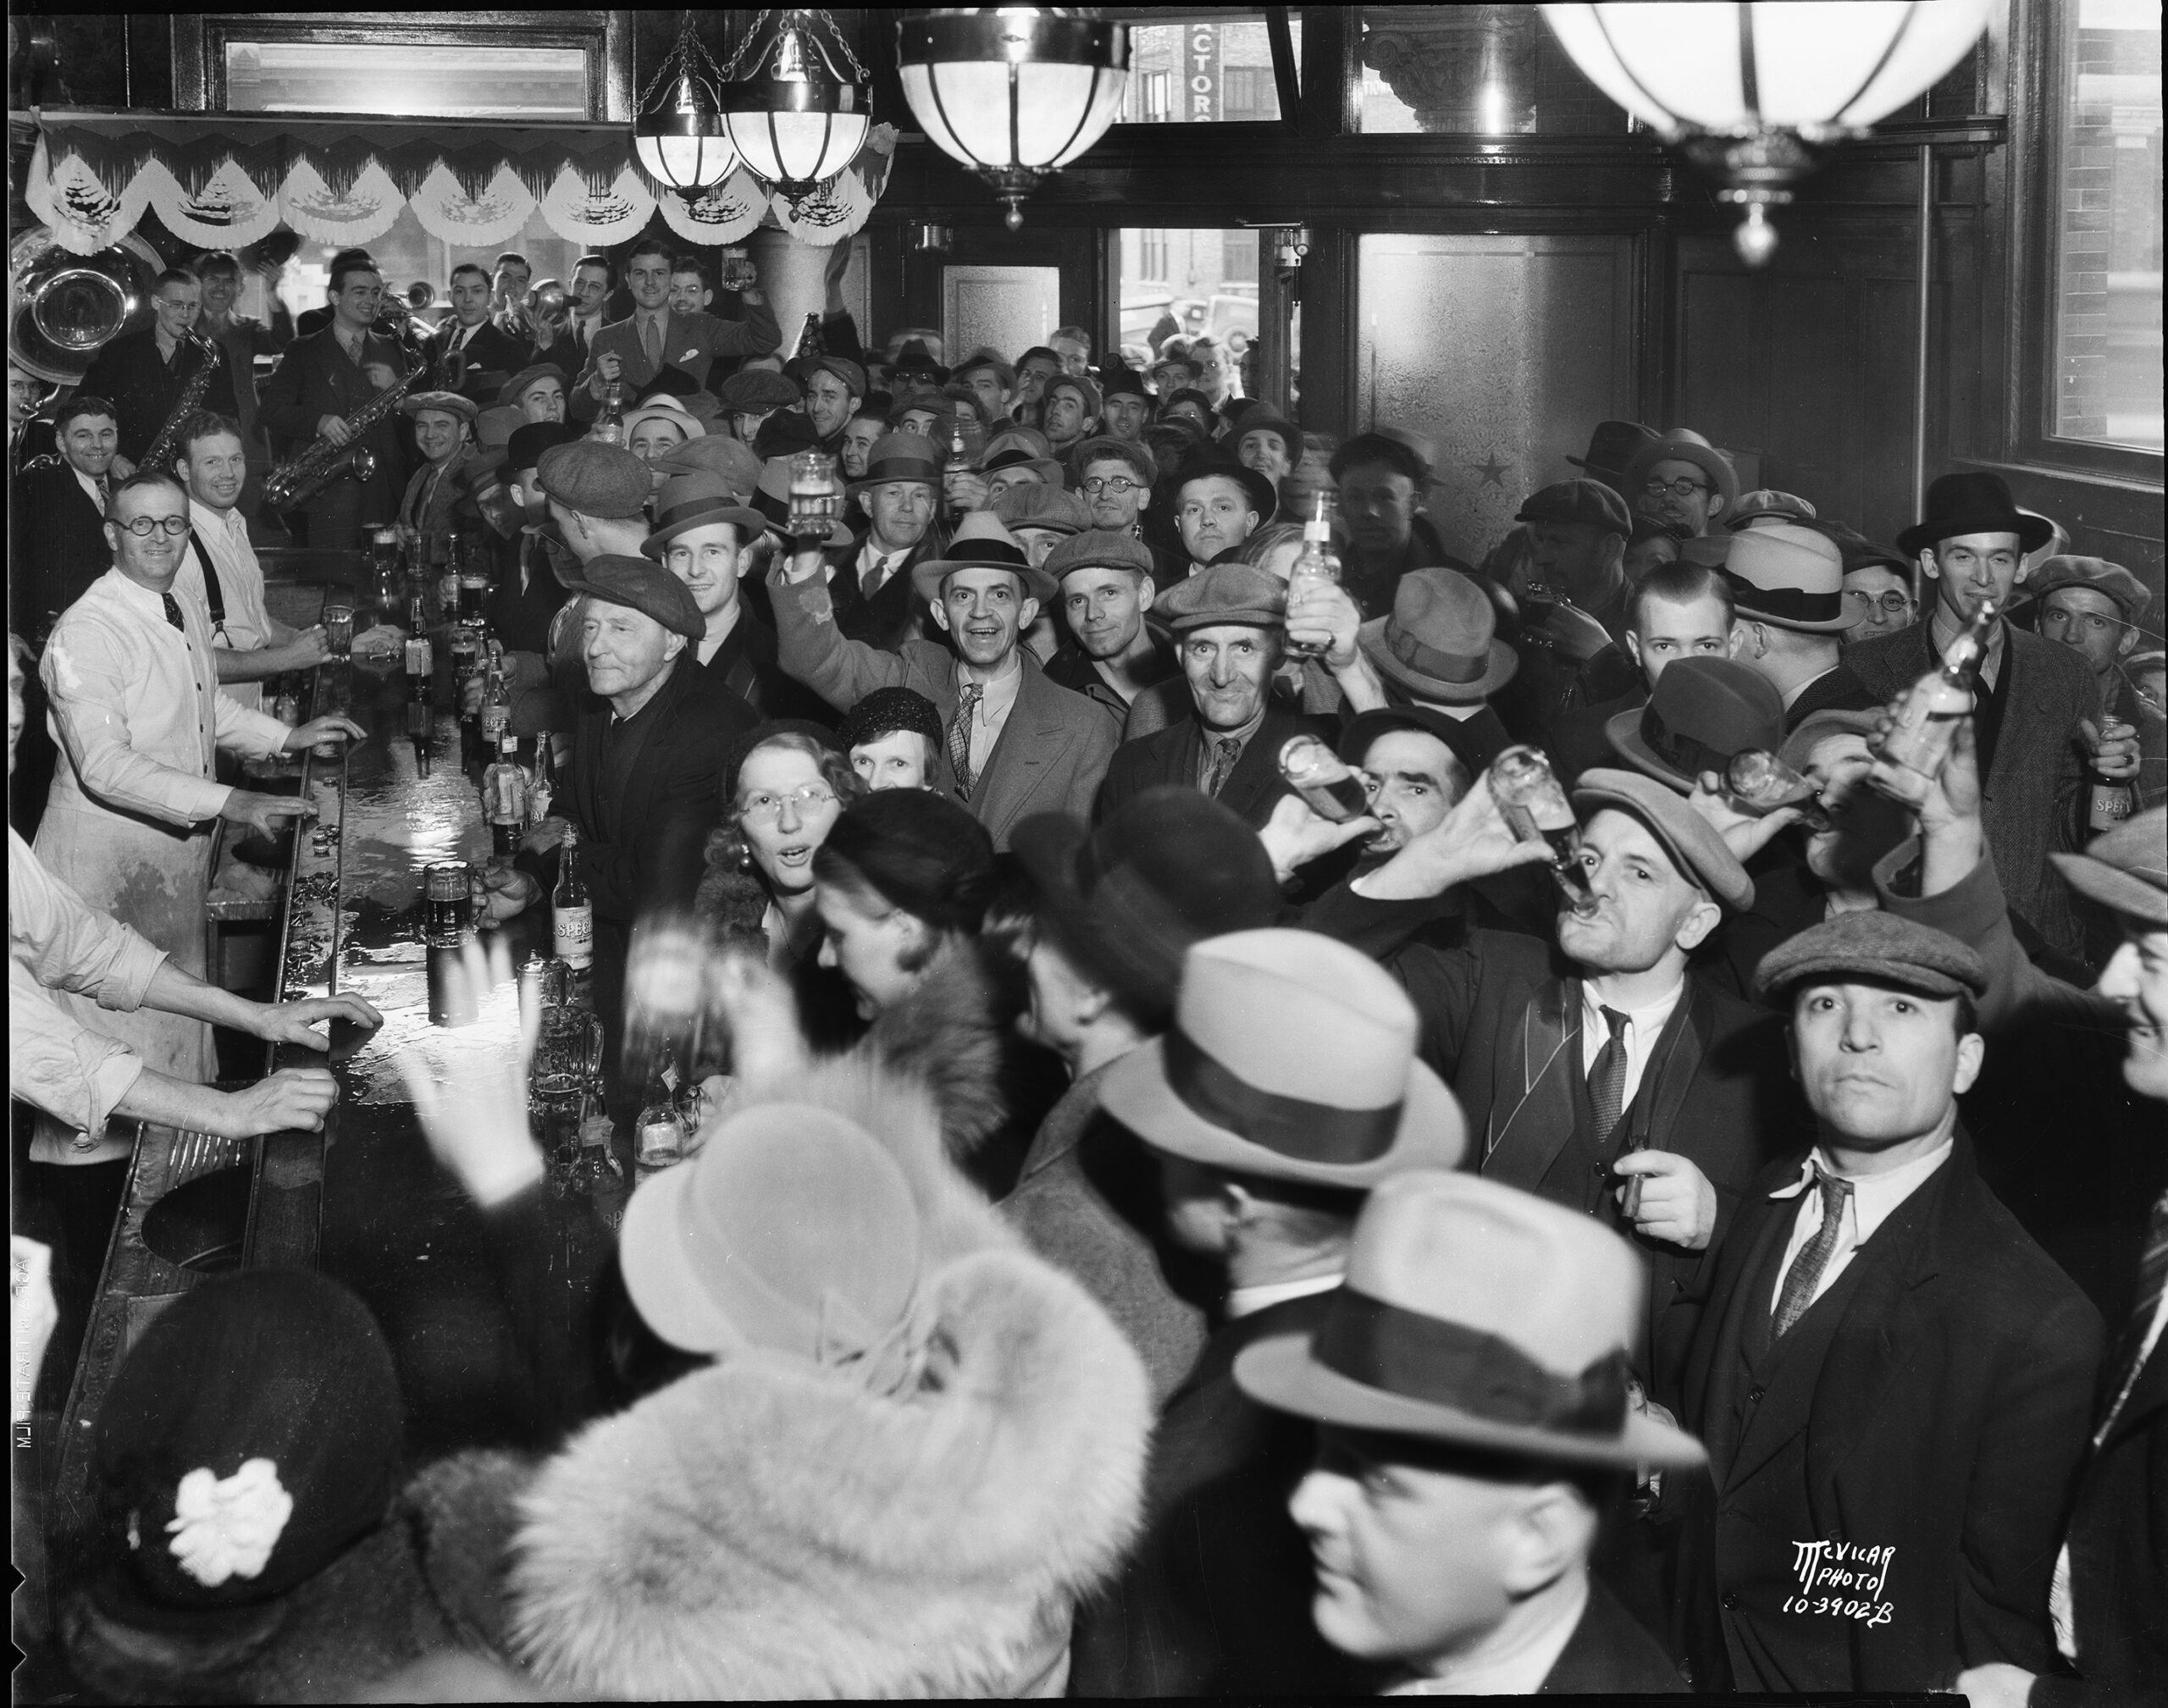 crowd of men and women drinking celebrating the end of Prohibition